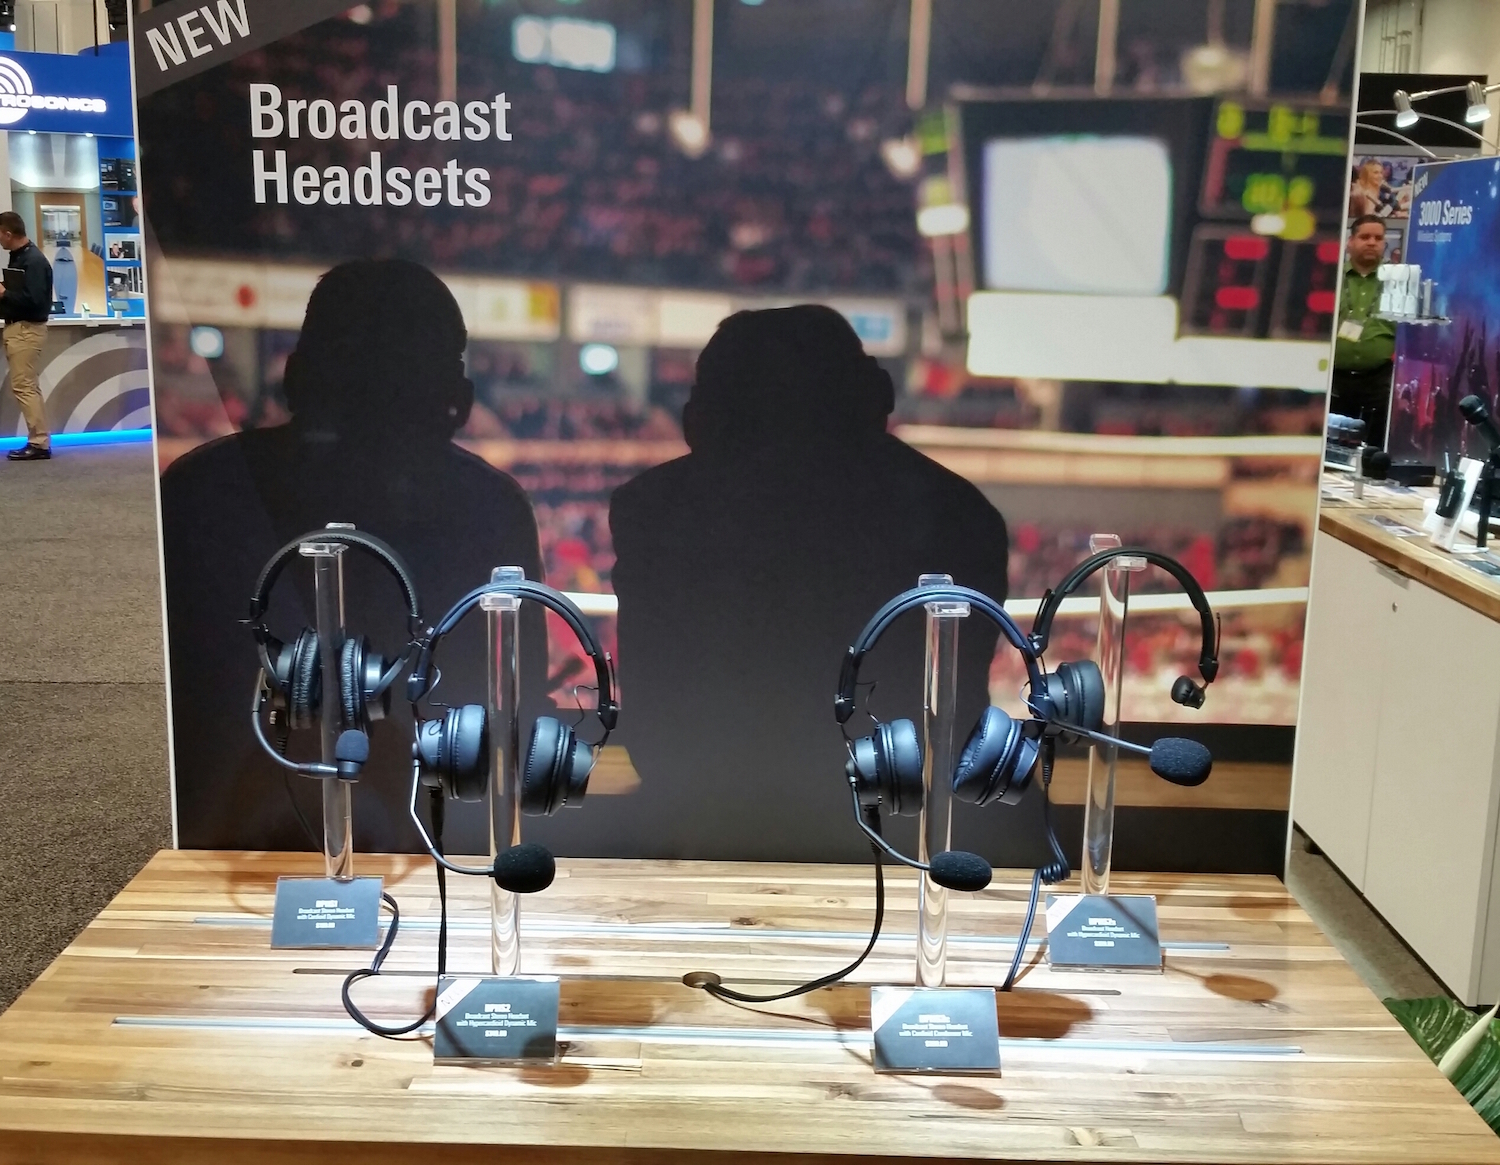 A-T Debuts BPHS2 Professional Broadcast Headsets